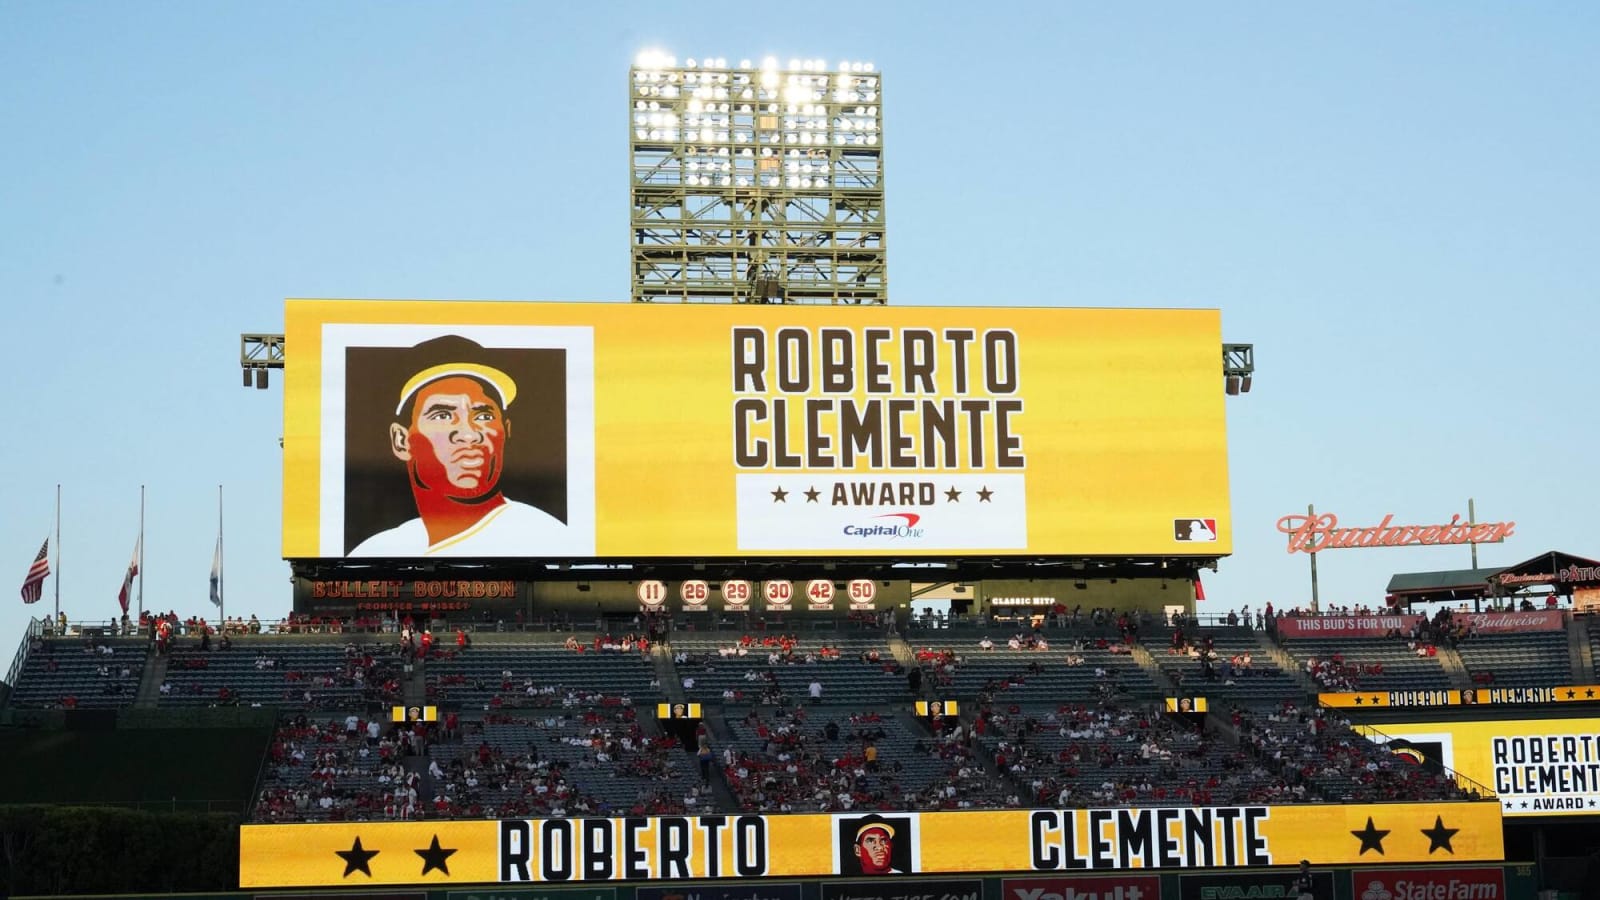 Video Shows The Legendary Abilities Of Roberto Clemente